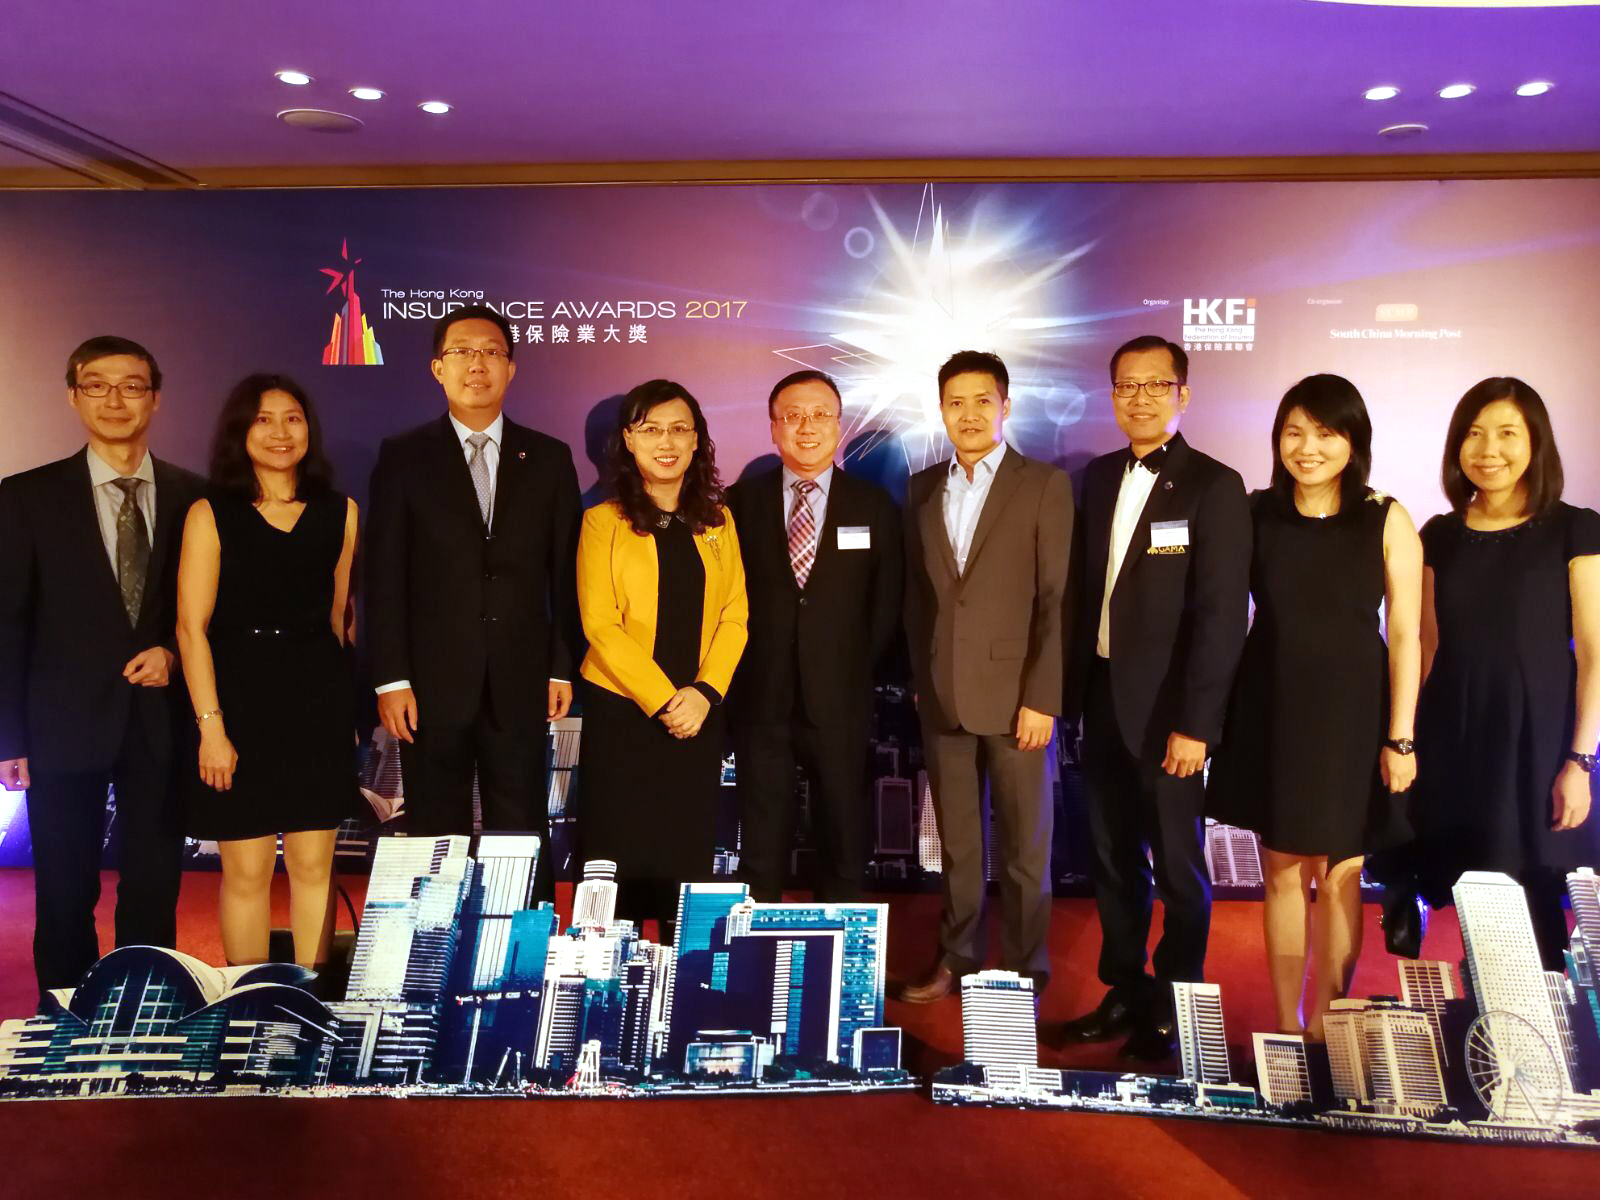 China Life (Overseas) named top-three finalist in the Hong Kong Insurance Awards 2017 (Outstanding InsurTech Innovation Award)